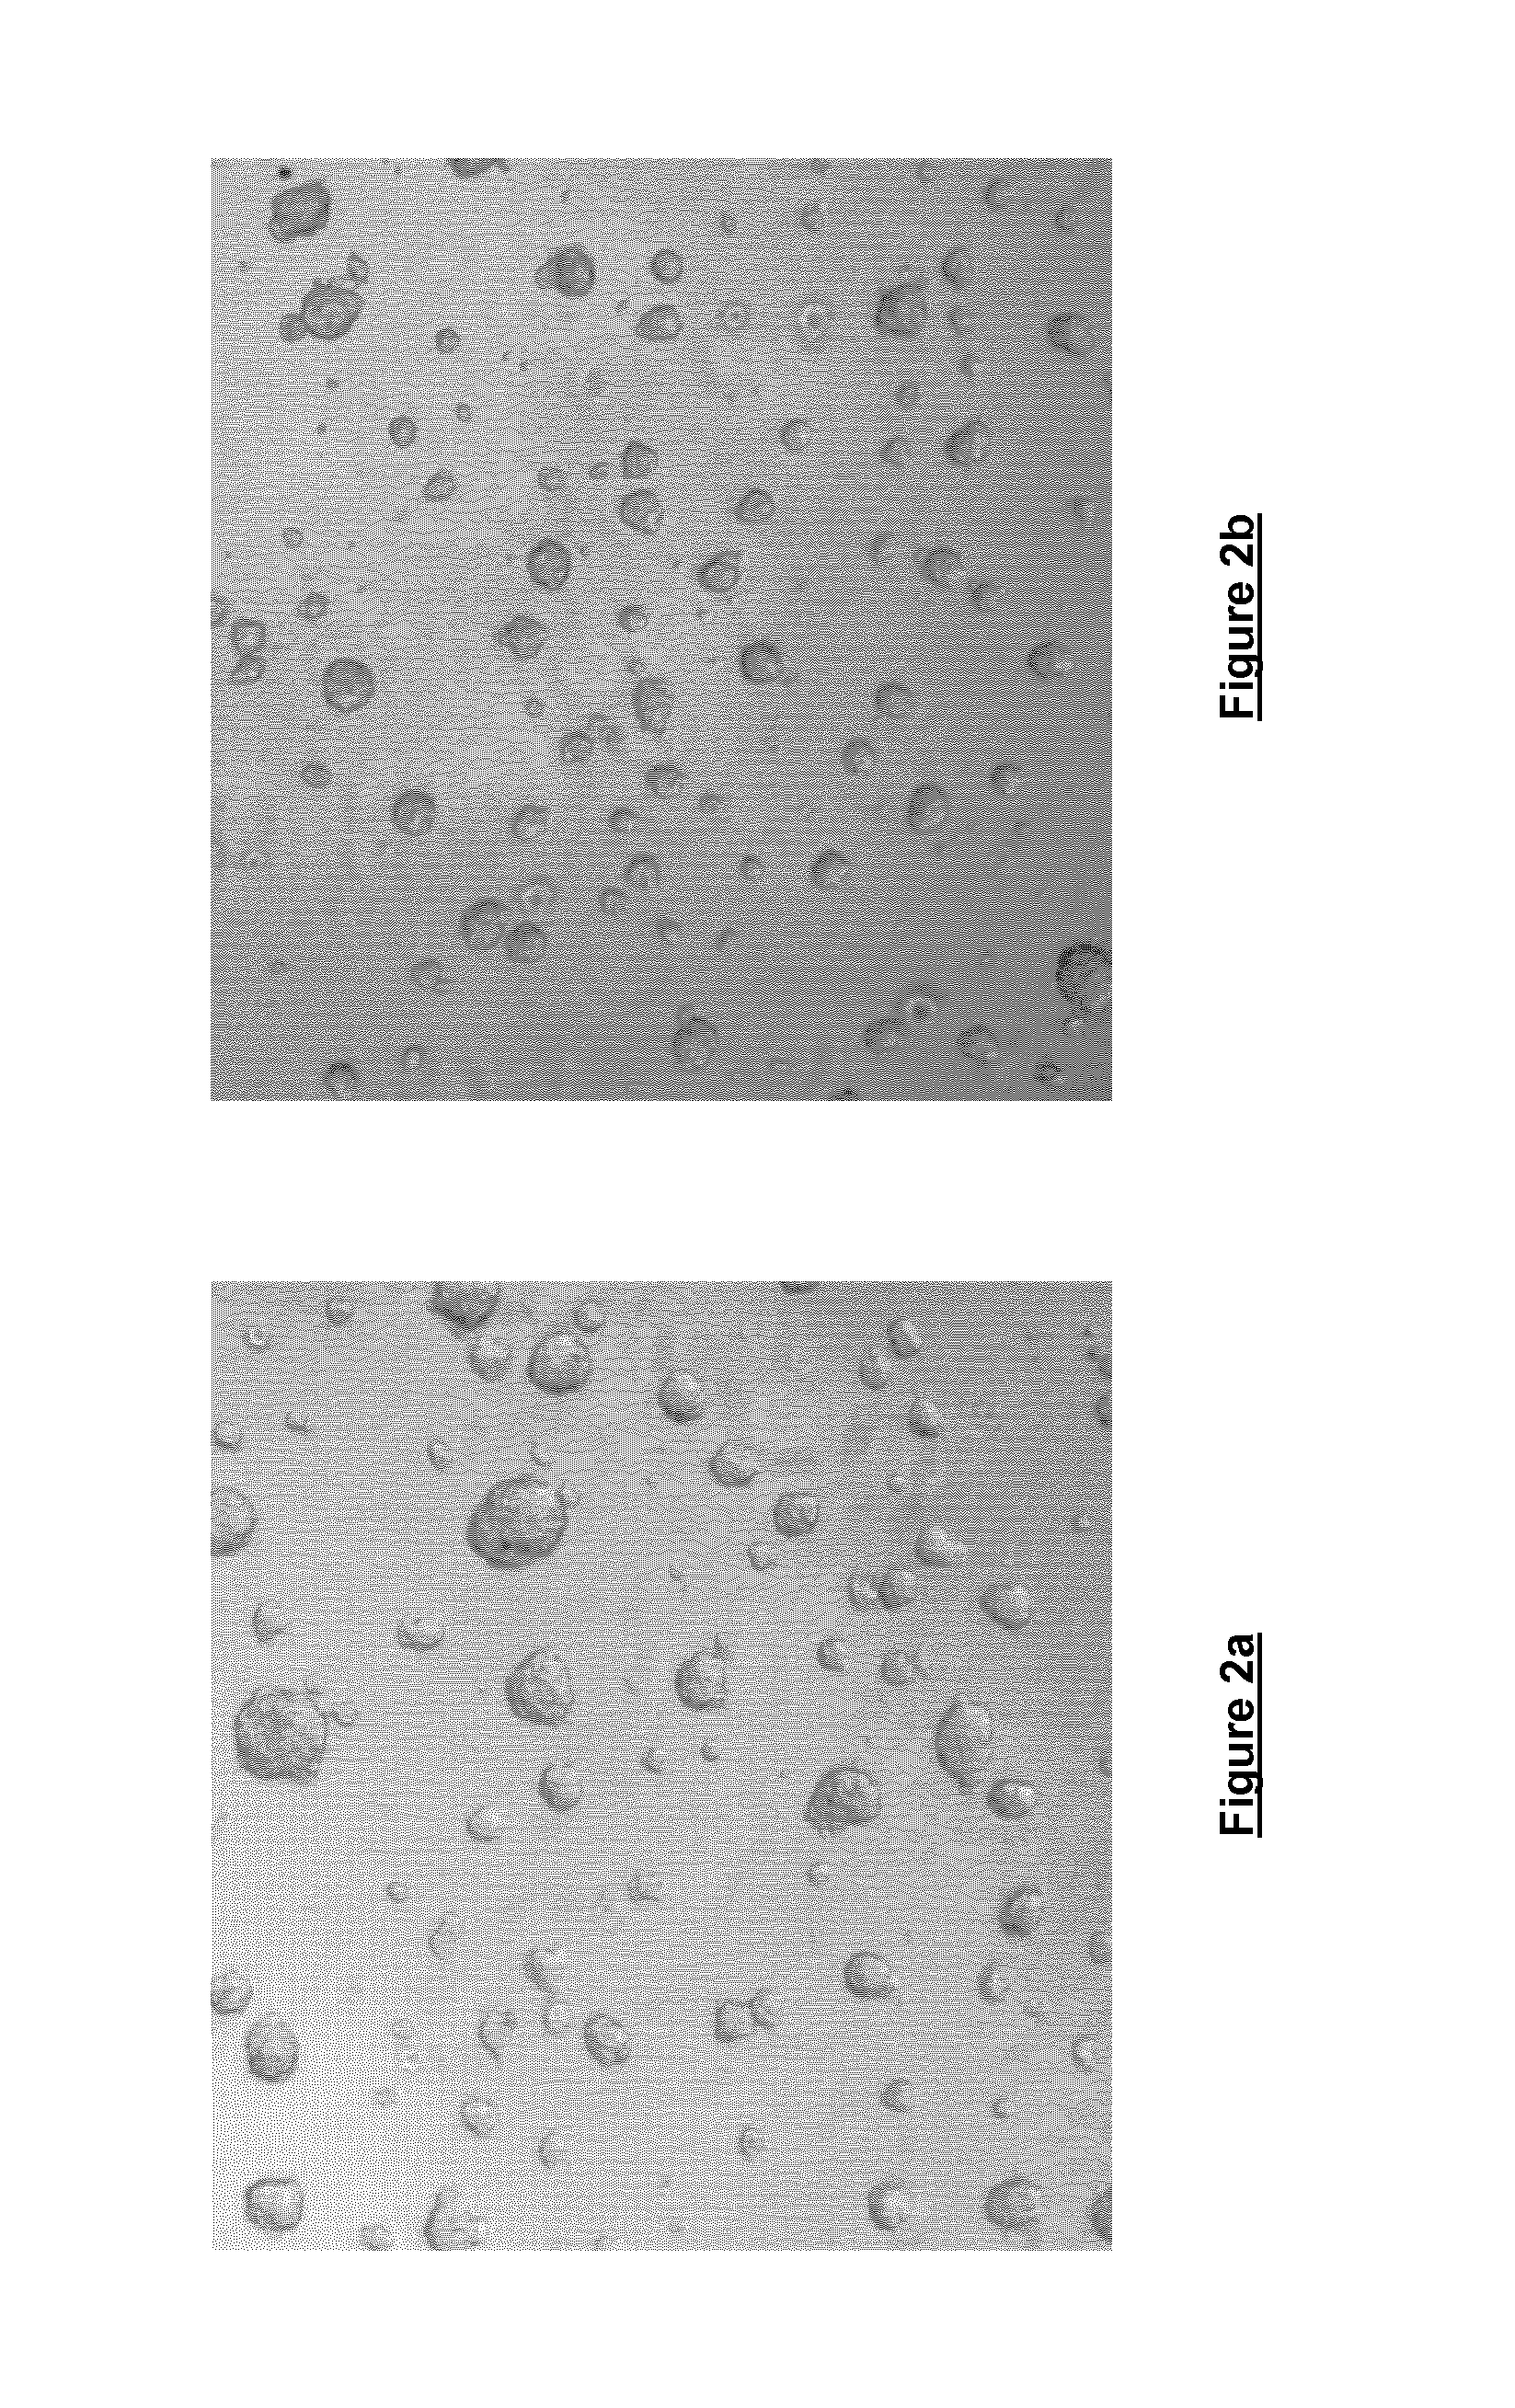 Cell suspension medium and cell suspension medium additive for the three dimensional growth of cells